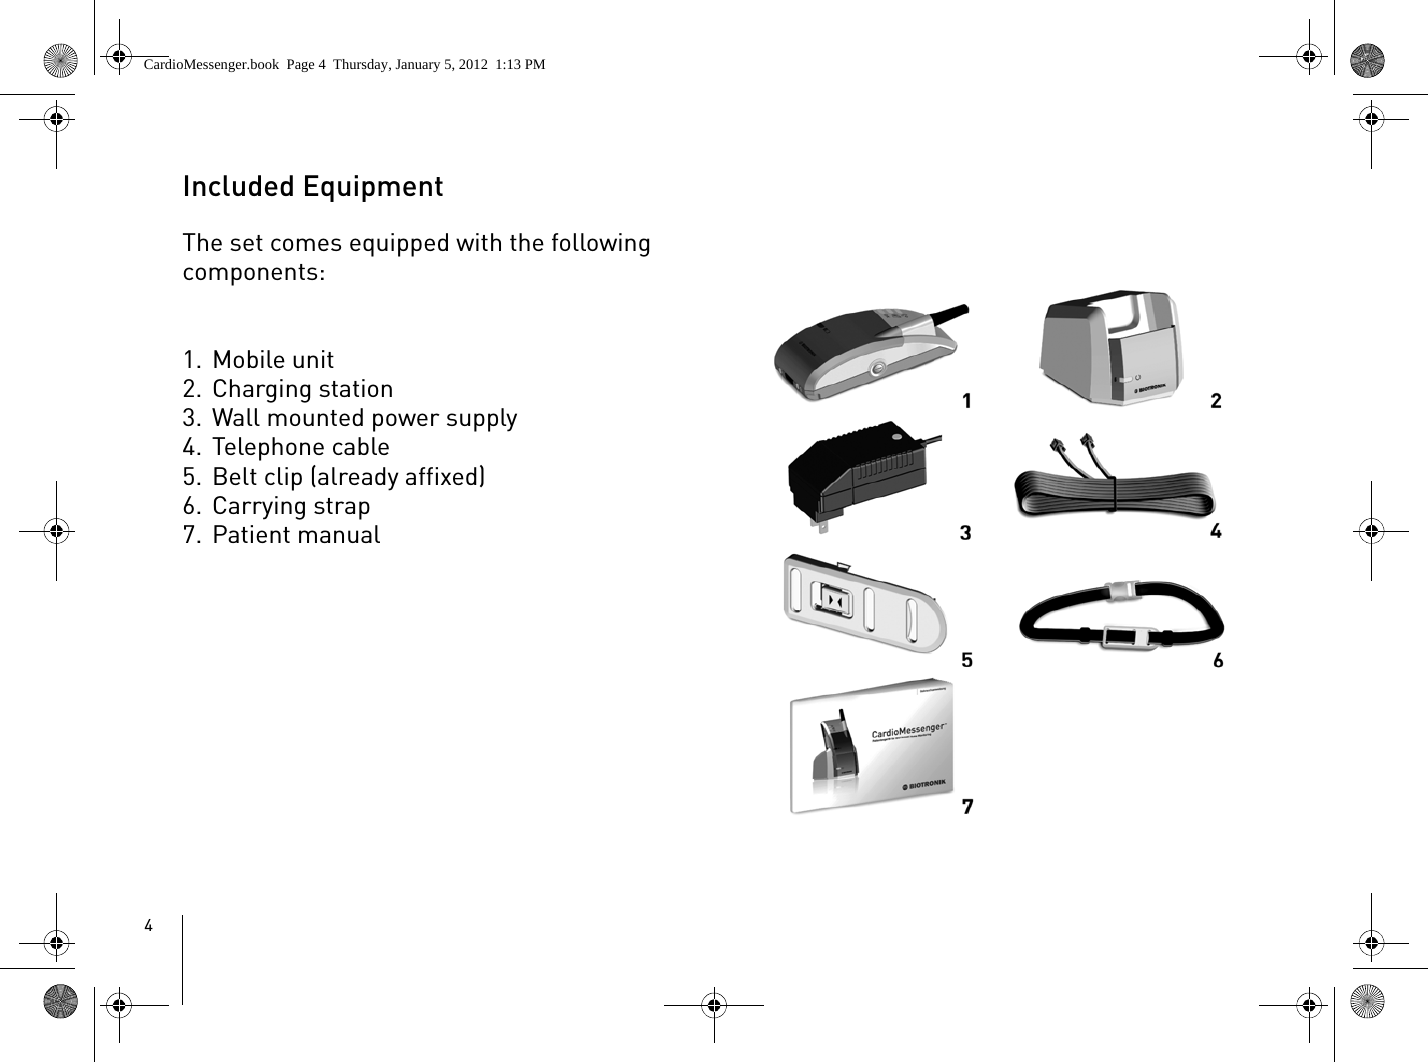 4Included EquipmentThe set comes equipped with the following components:1. Mobile unit2. Charging station3. Wall mounted power supply 4. Telephone cable5. Belt clip (already affixed)6. Carrying strap7. Patient manualCardioMessenger.book  Page 4  Thursday, January 5, 2012  1:13 PM